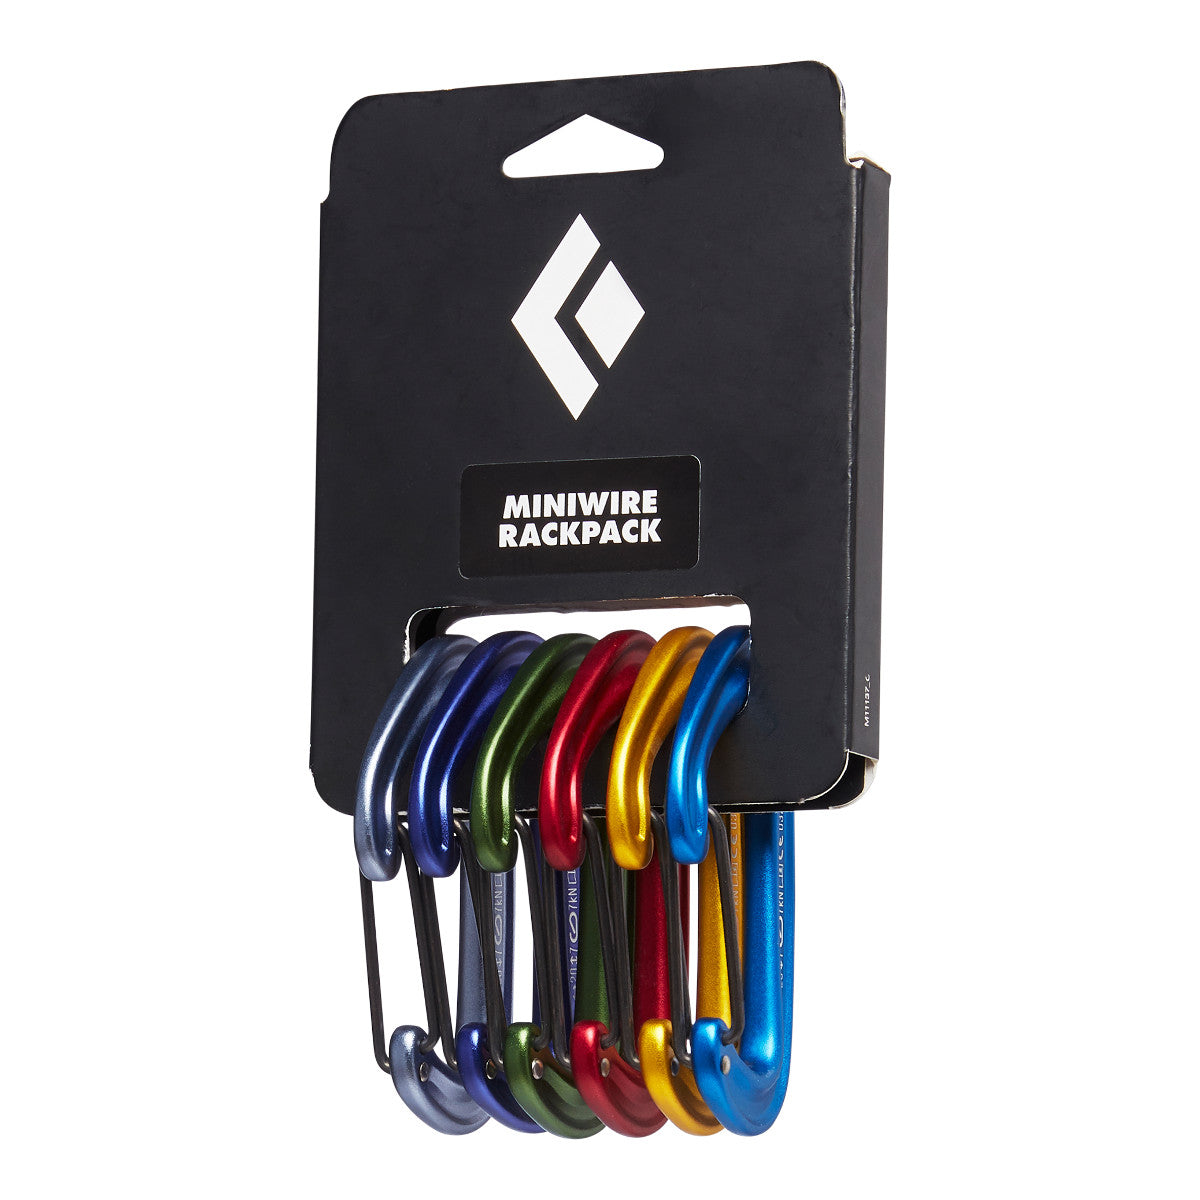 Black diamond Miniwire Rackpack showing 6 carabiners in different colours held together with black header card